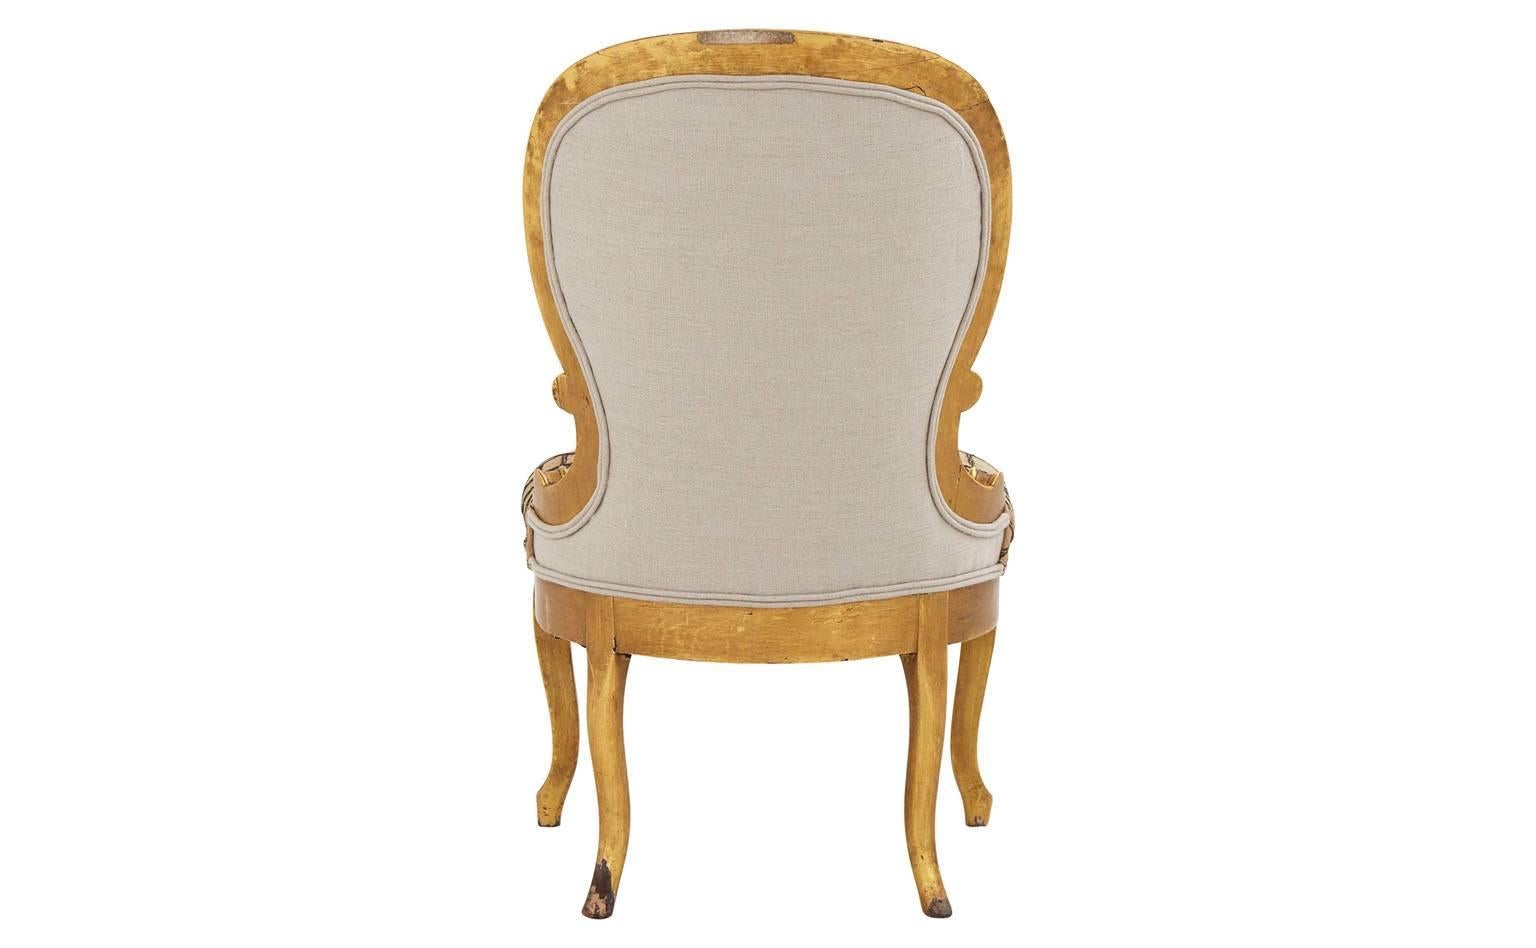 Reupholstered in kuba cloth.
Hand-carved giltwood frame.
19th century.
France.

Dimensions: 
Overall: 19